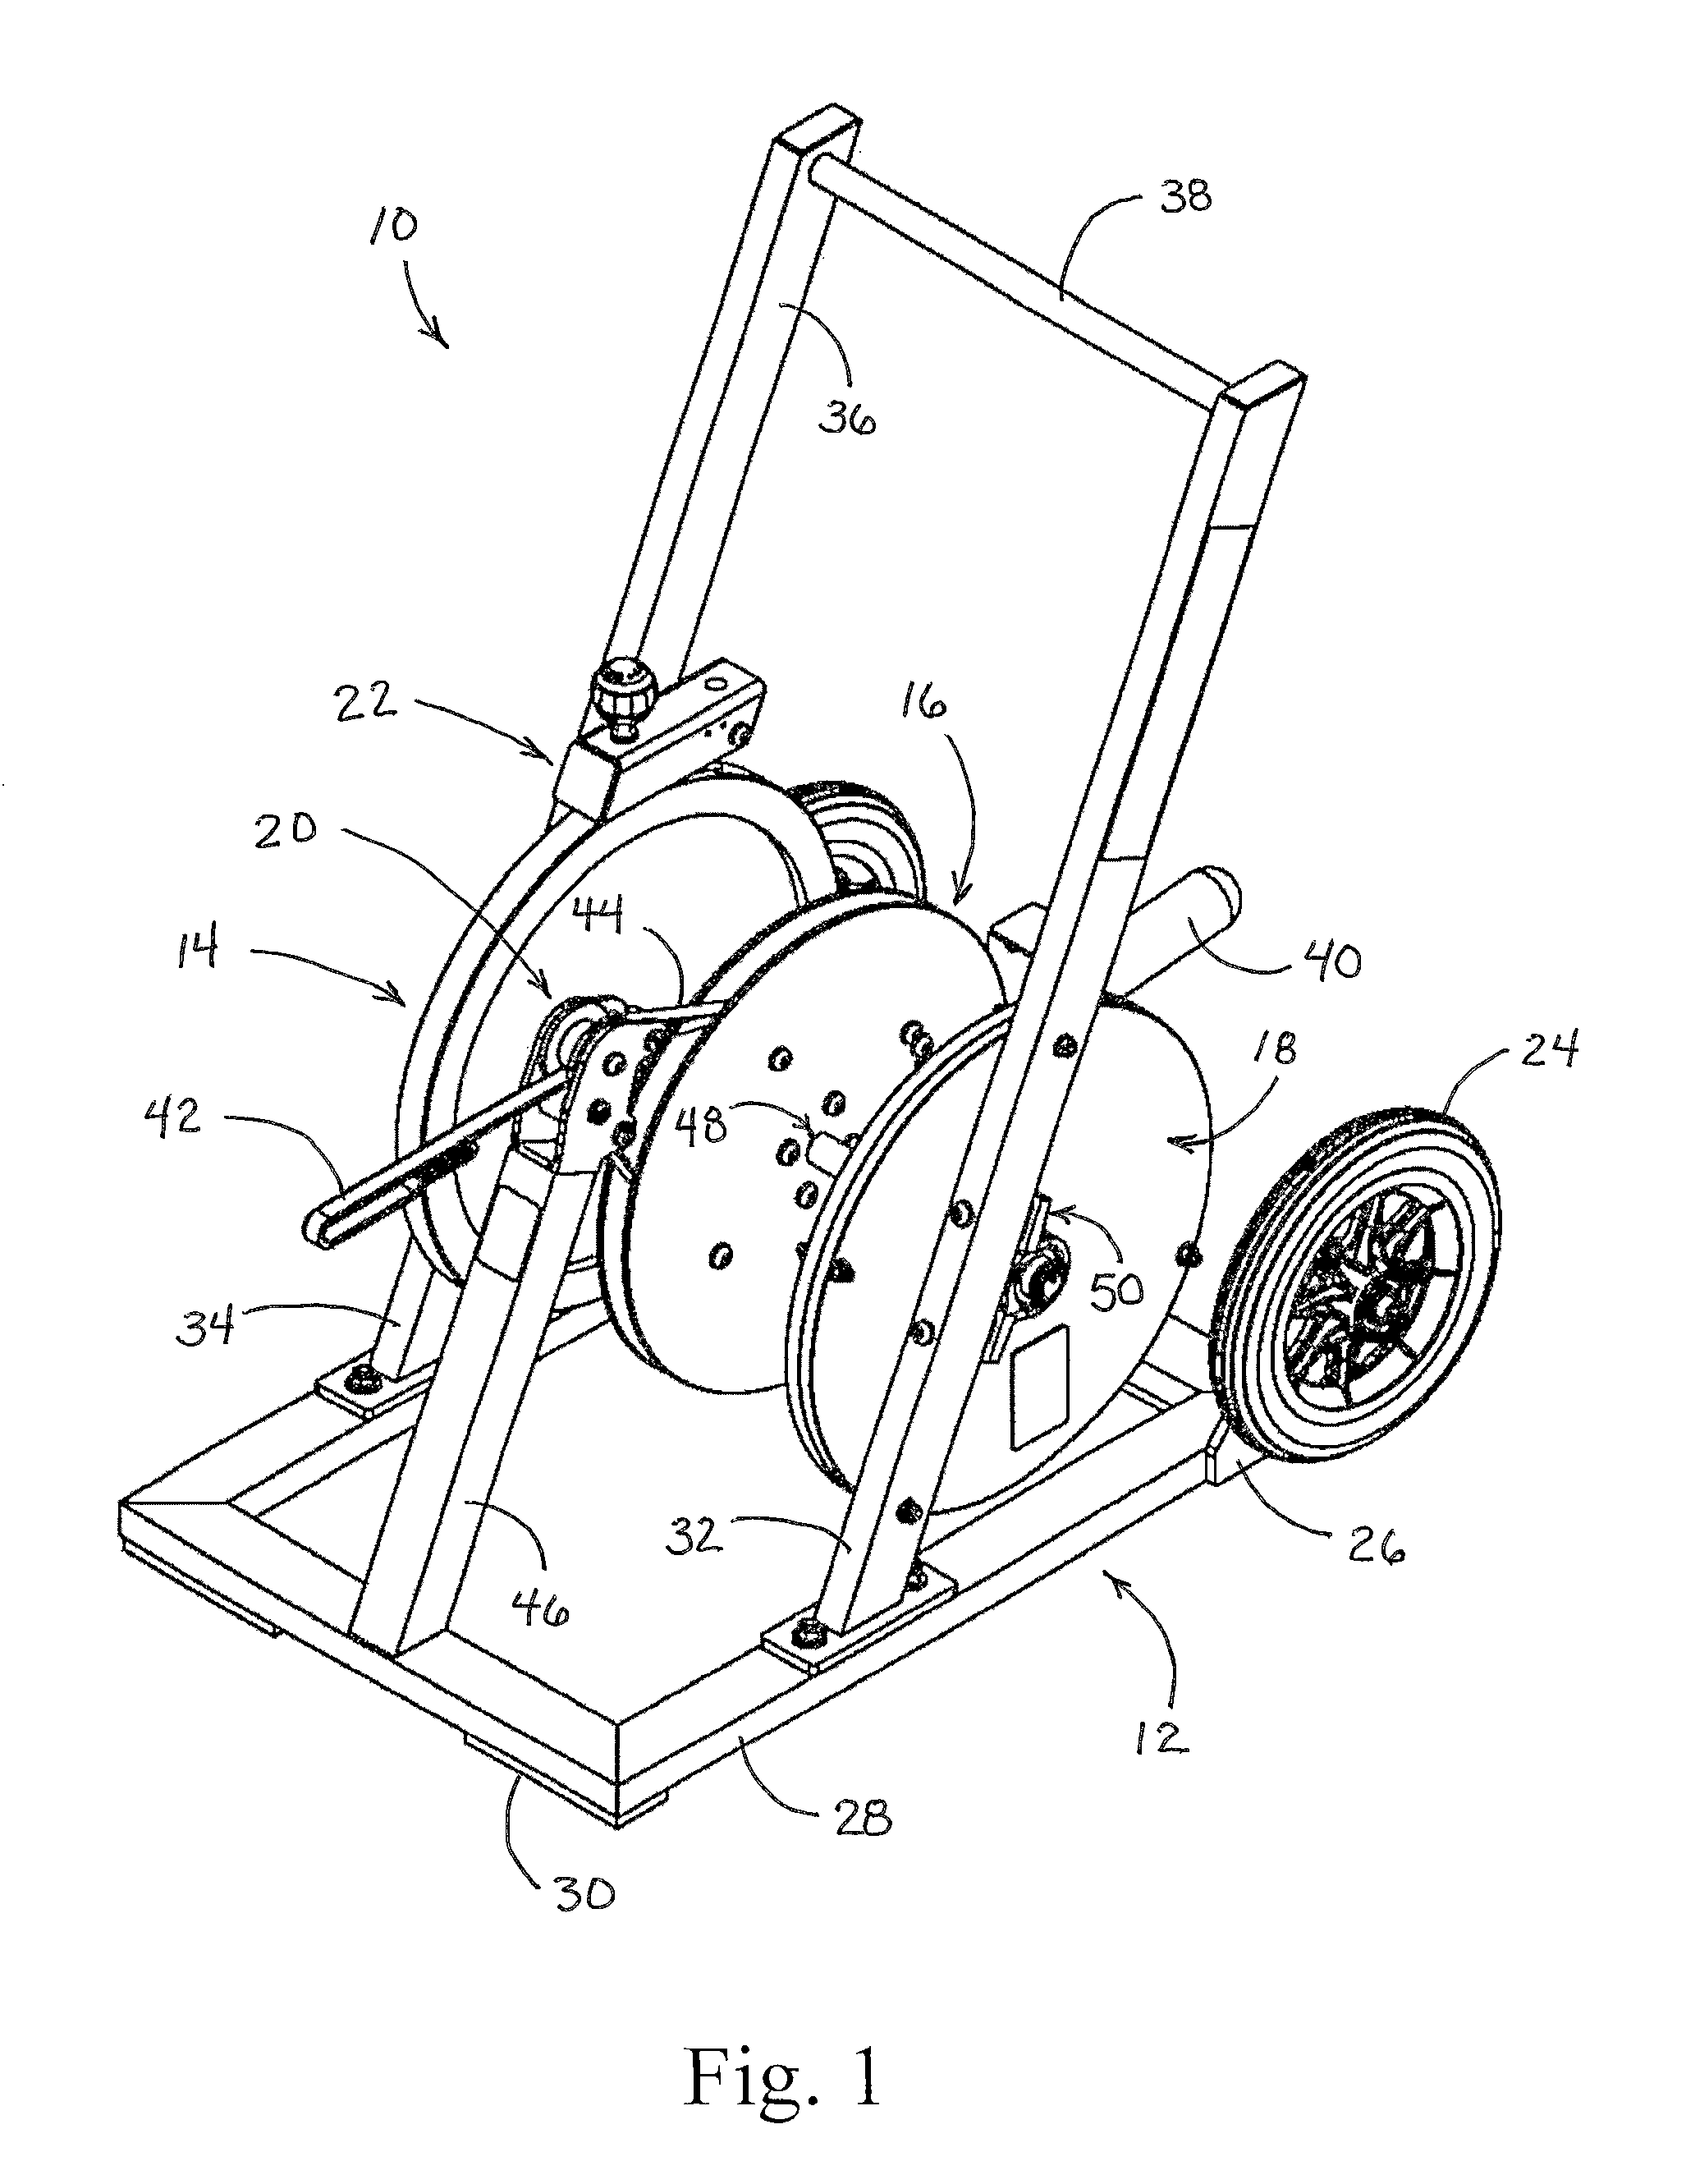 Exercise machine for providing resistance to ambulatory motion of the user